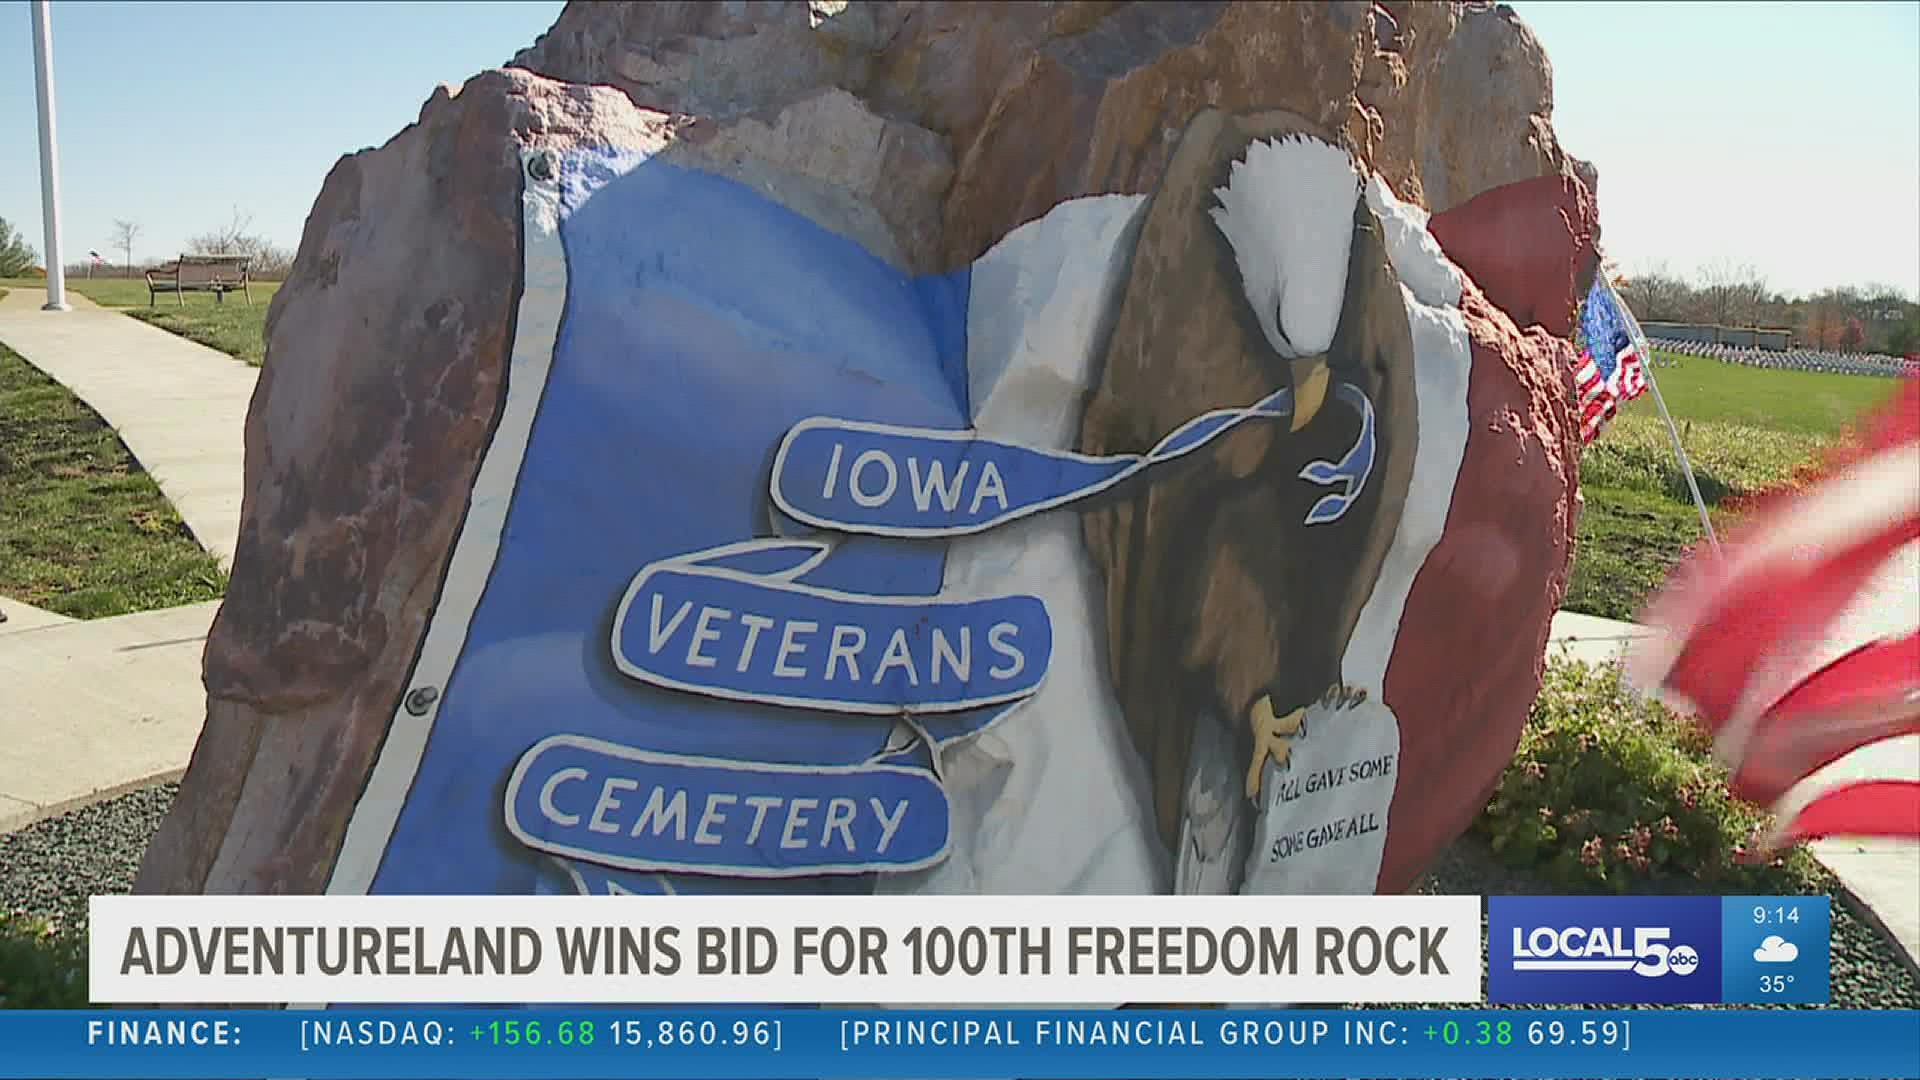 Ray "Bubba" Sorensen II has painted a Freedom Rock in each of Iowa's 99 counties. Here's where the 100th rock will go.